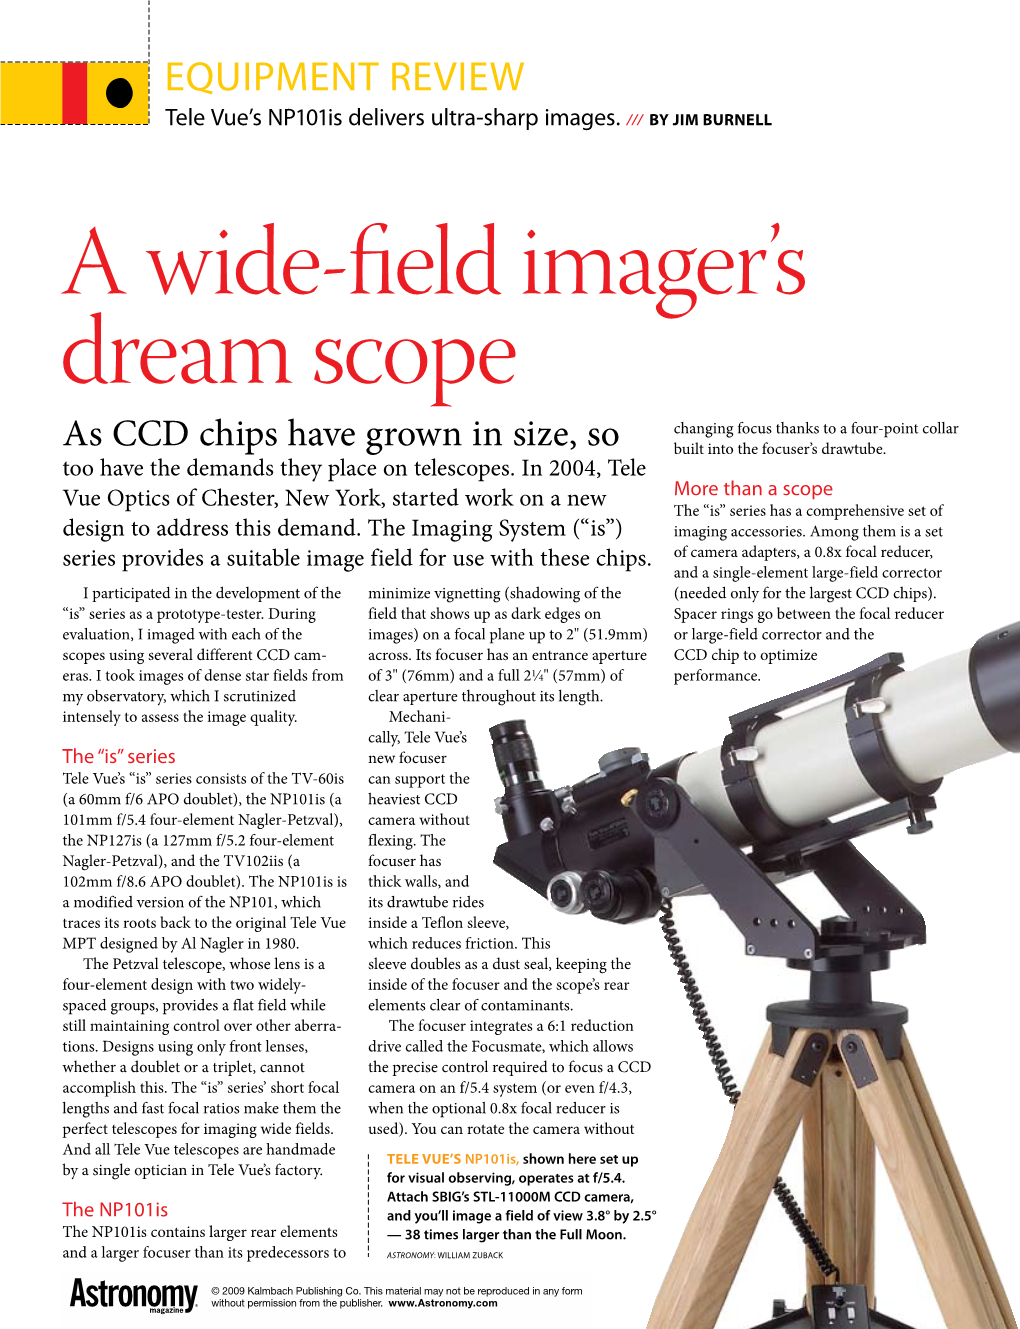 A Wide-Field Imager's Dream Scope